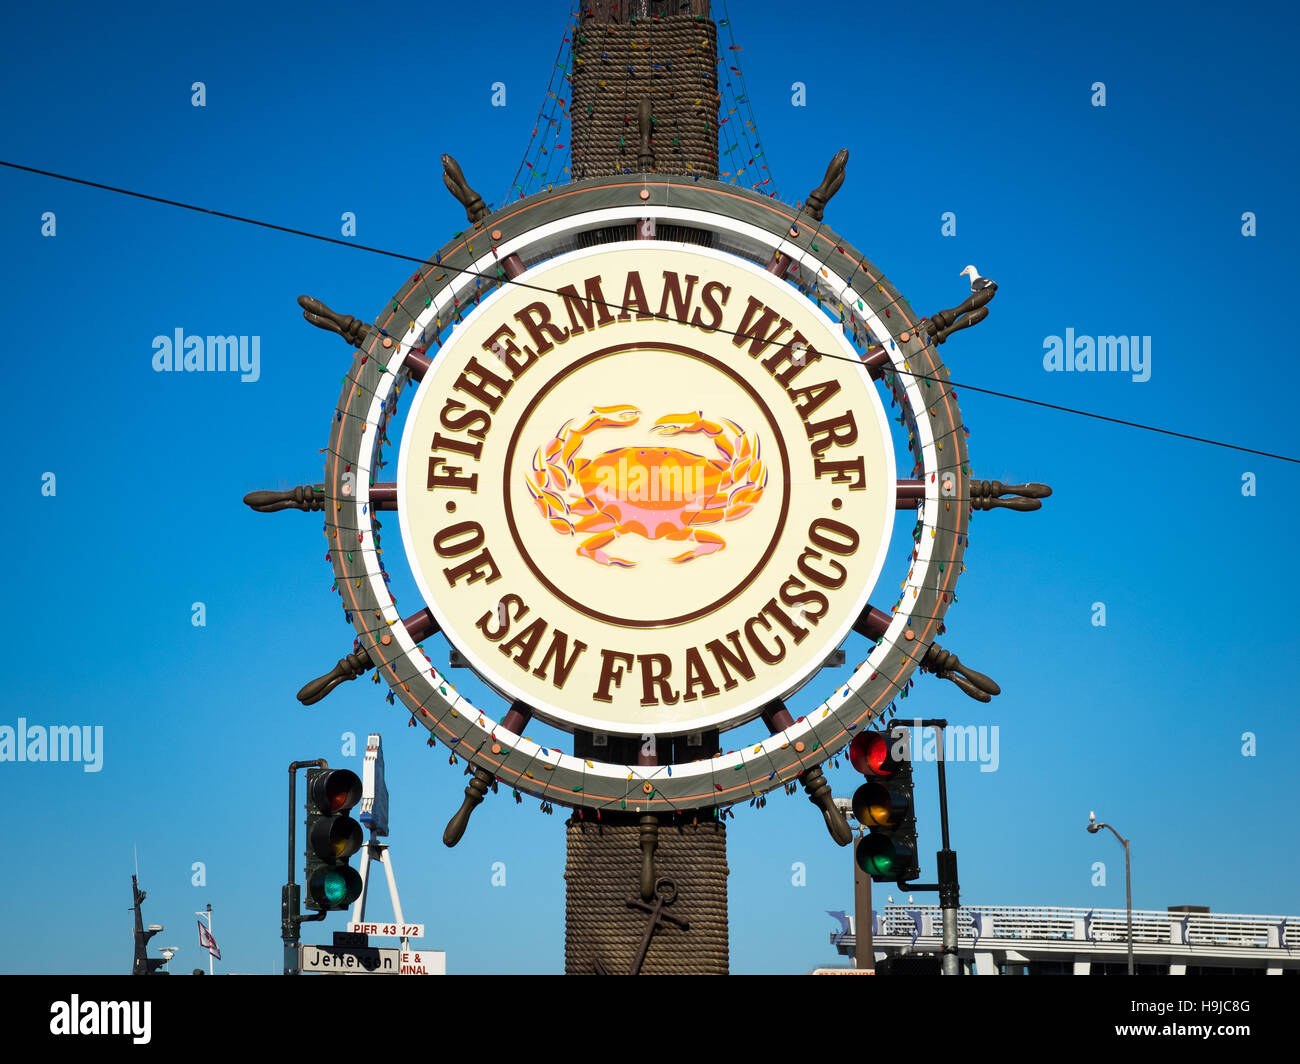 A view of the famous Fisherman's Wharf sign in San Francisco, California. Stock Photo